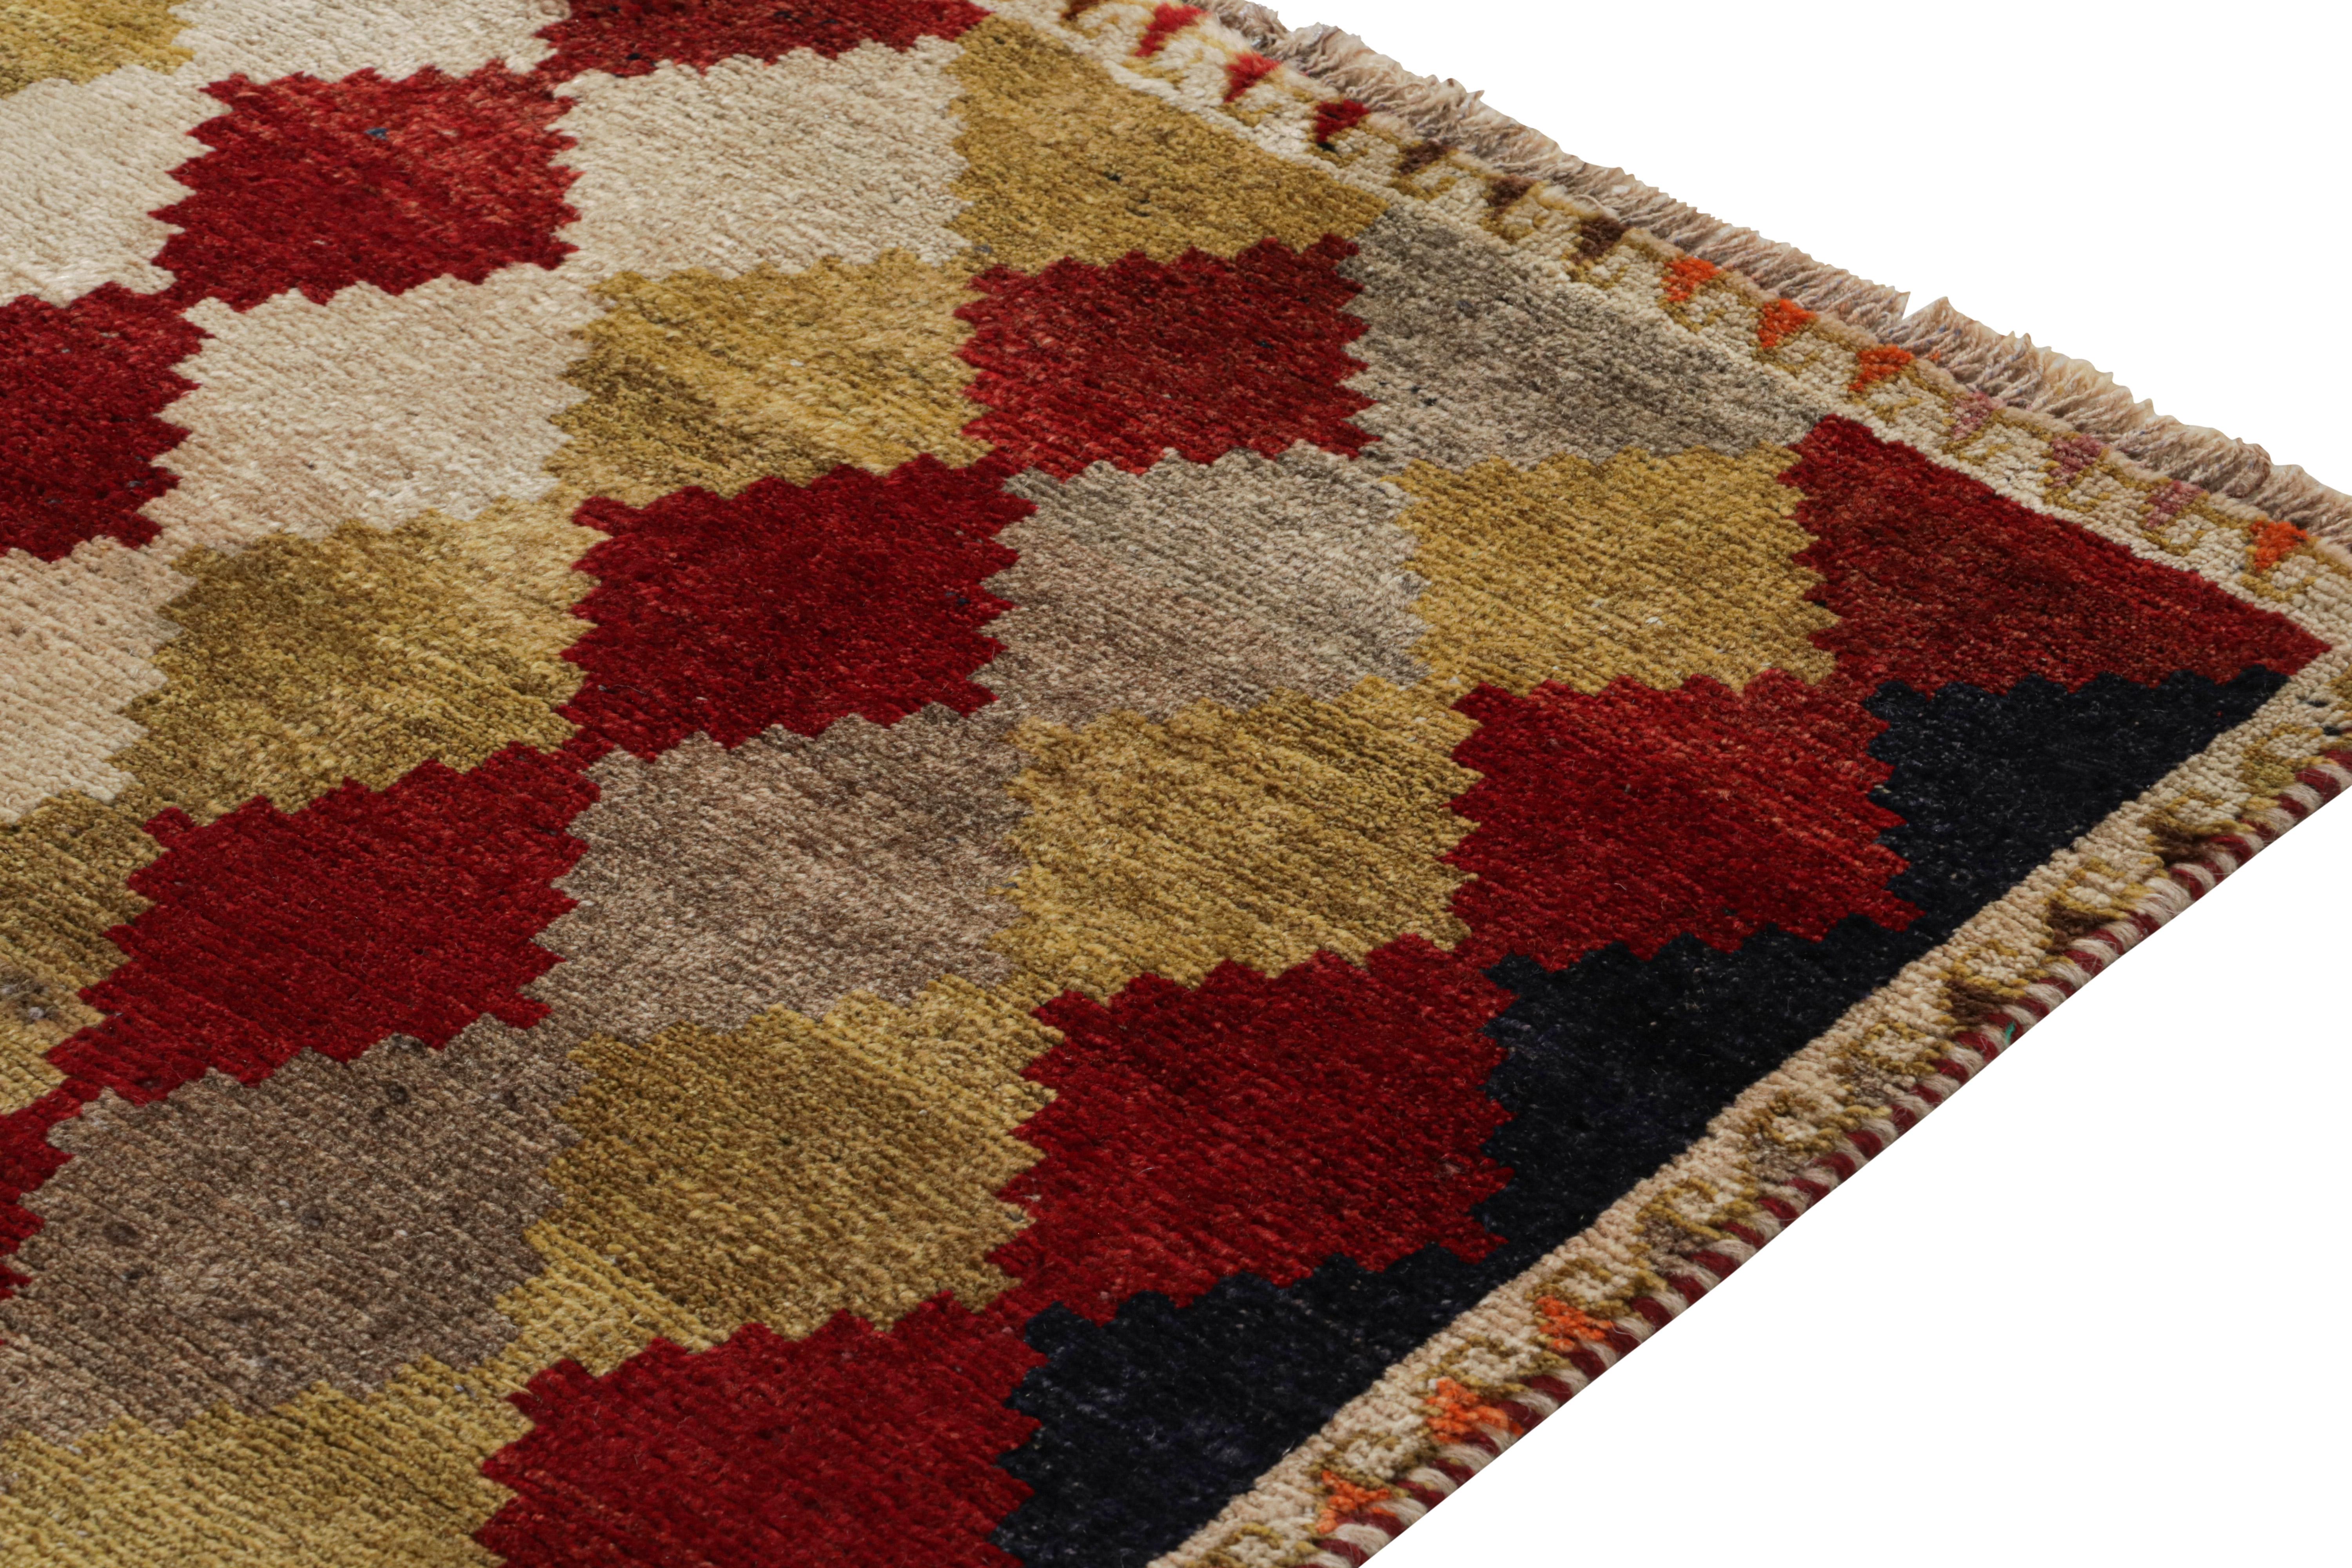 Vintage Gabbeh Tribal Runner in Red and Beige Diamond Patterns by Rug & Kilim In Good Condition For Sale In Long Island City, NY